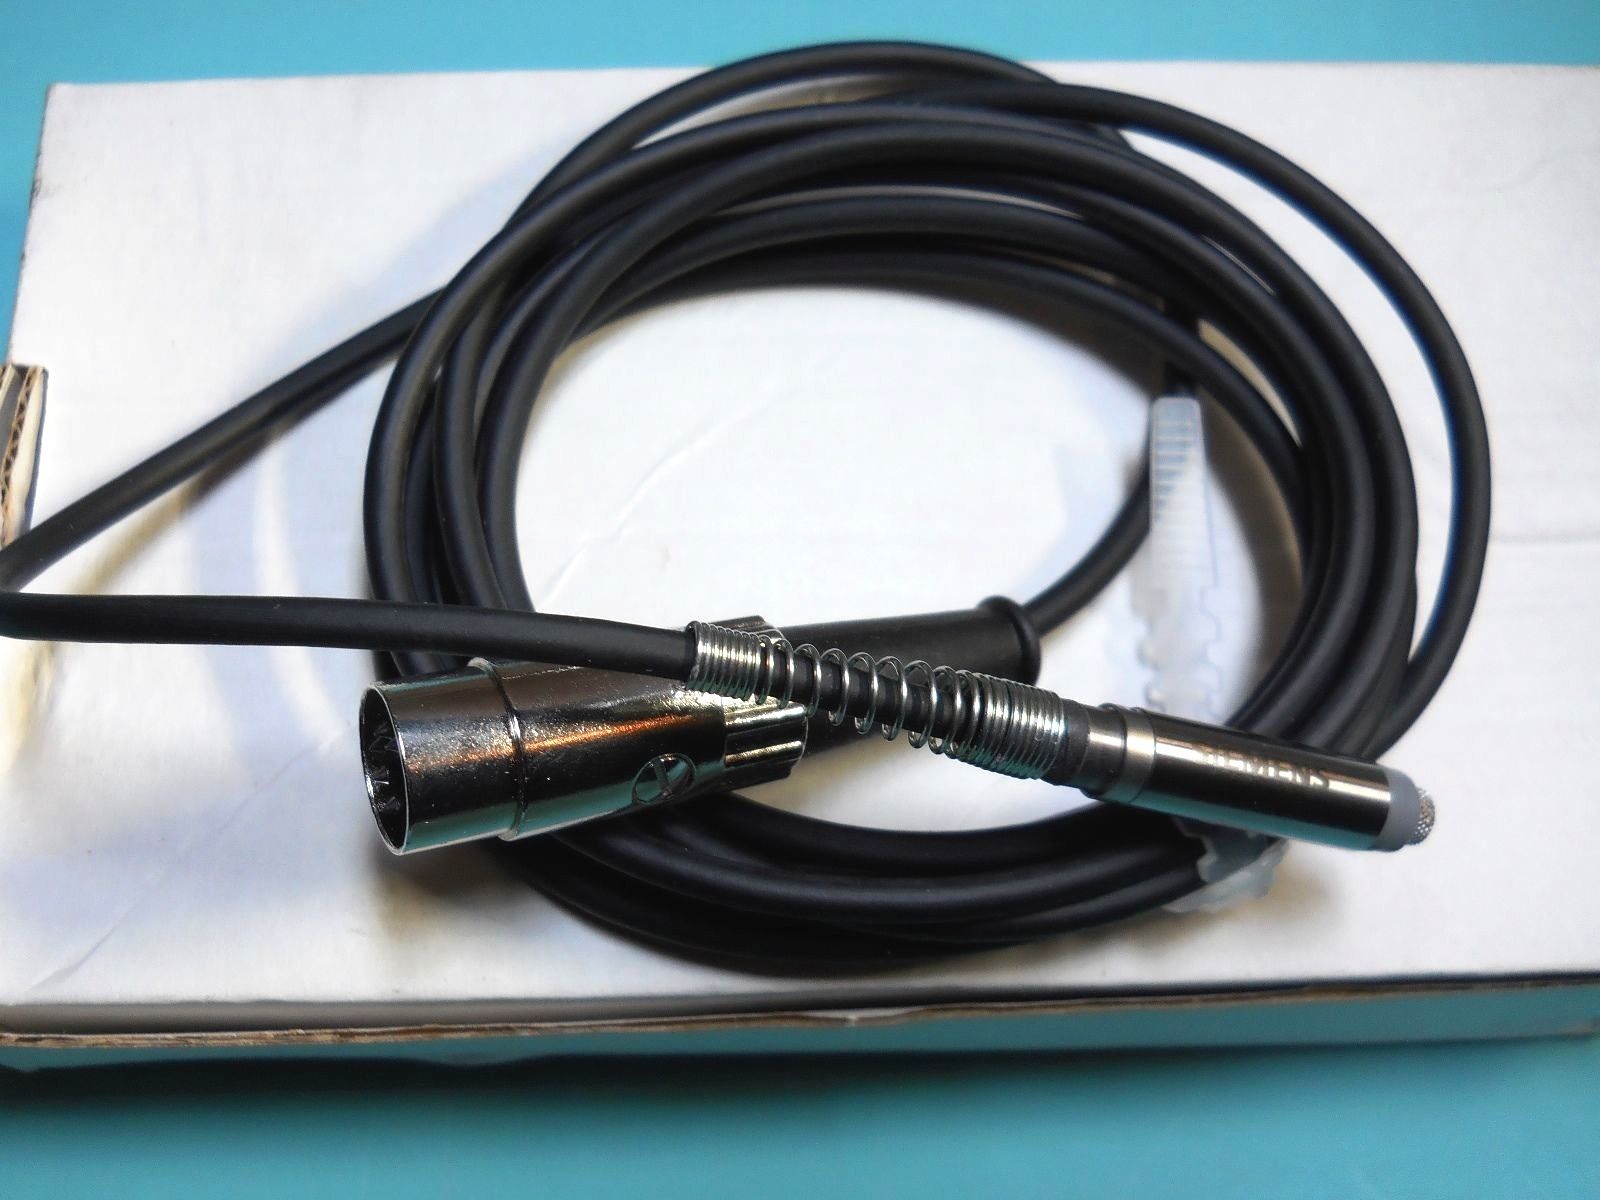 SIEMENS 13820-96 LINEAR TRANSDUCER PROBE ASSEMBLY M922152A224F NEW IN BOX DIAGNOSTIC ULTRASOUND MACHINES FOR SALE